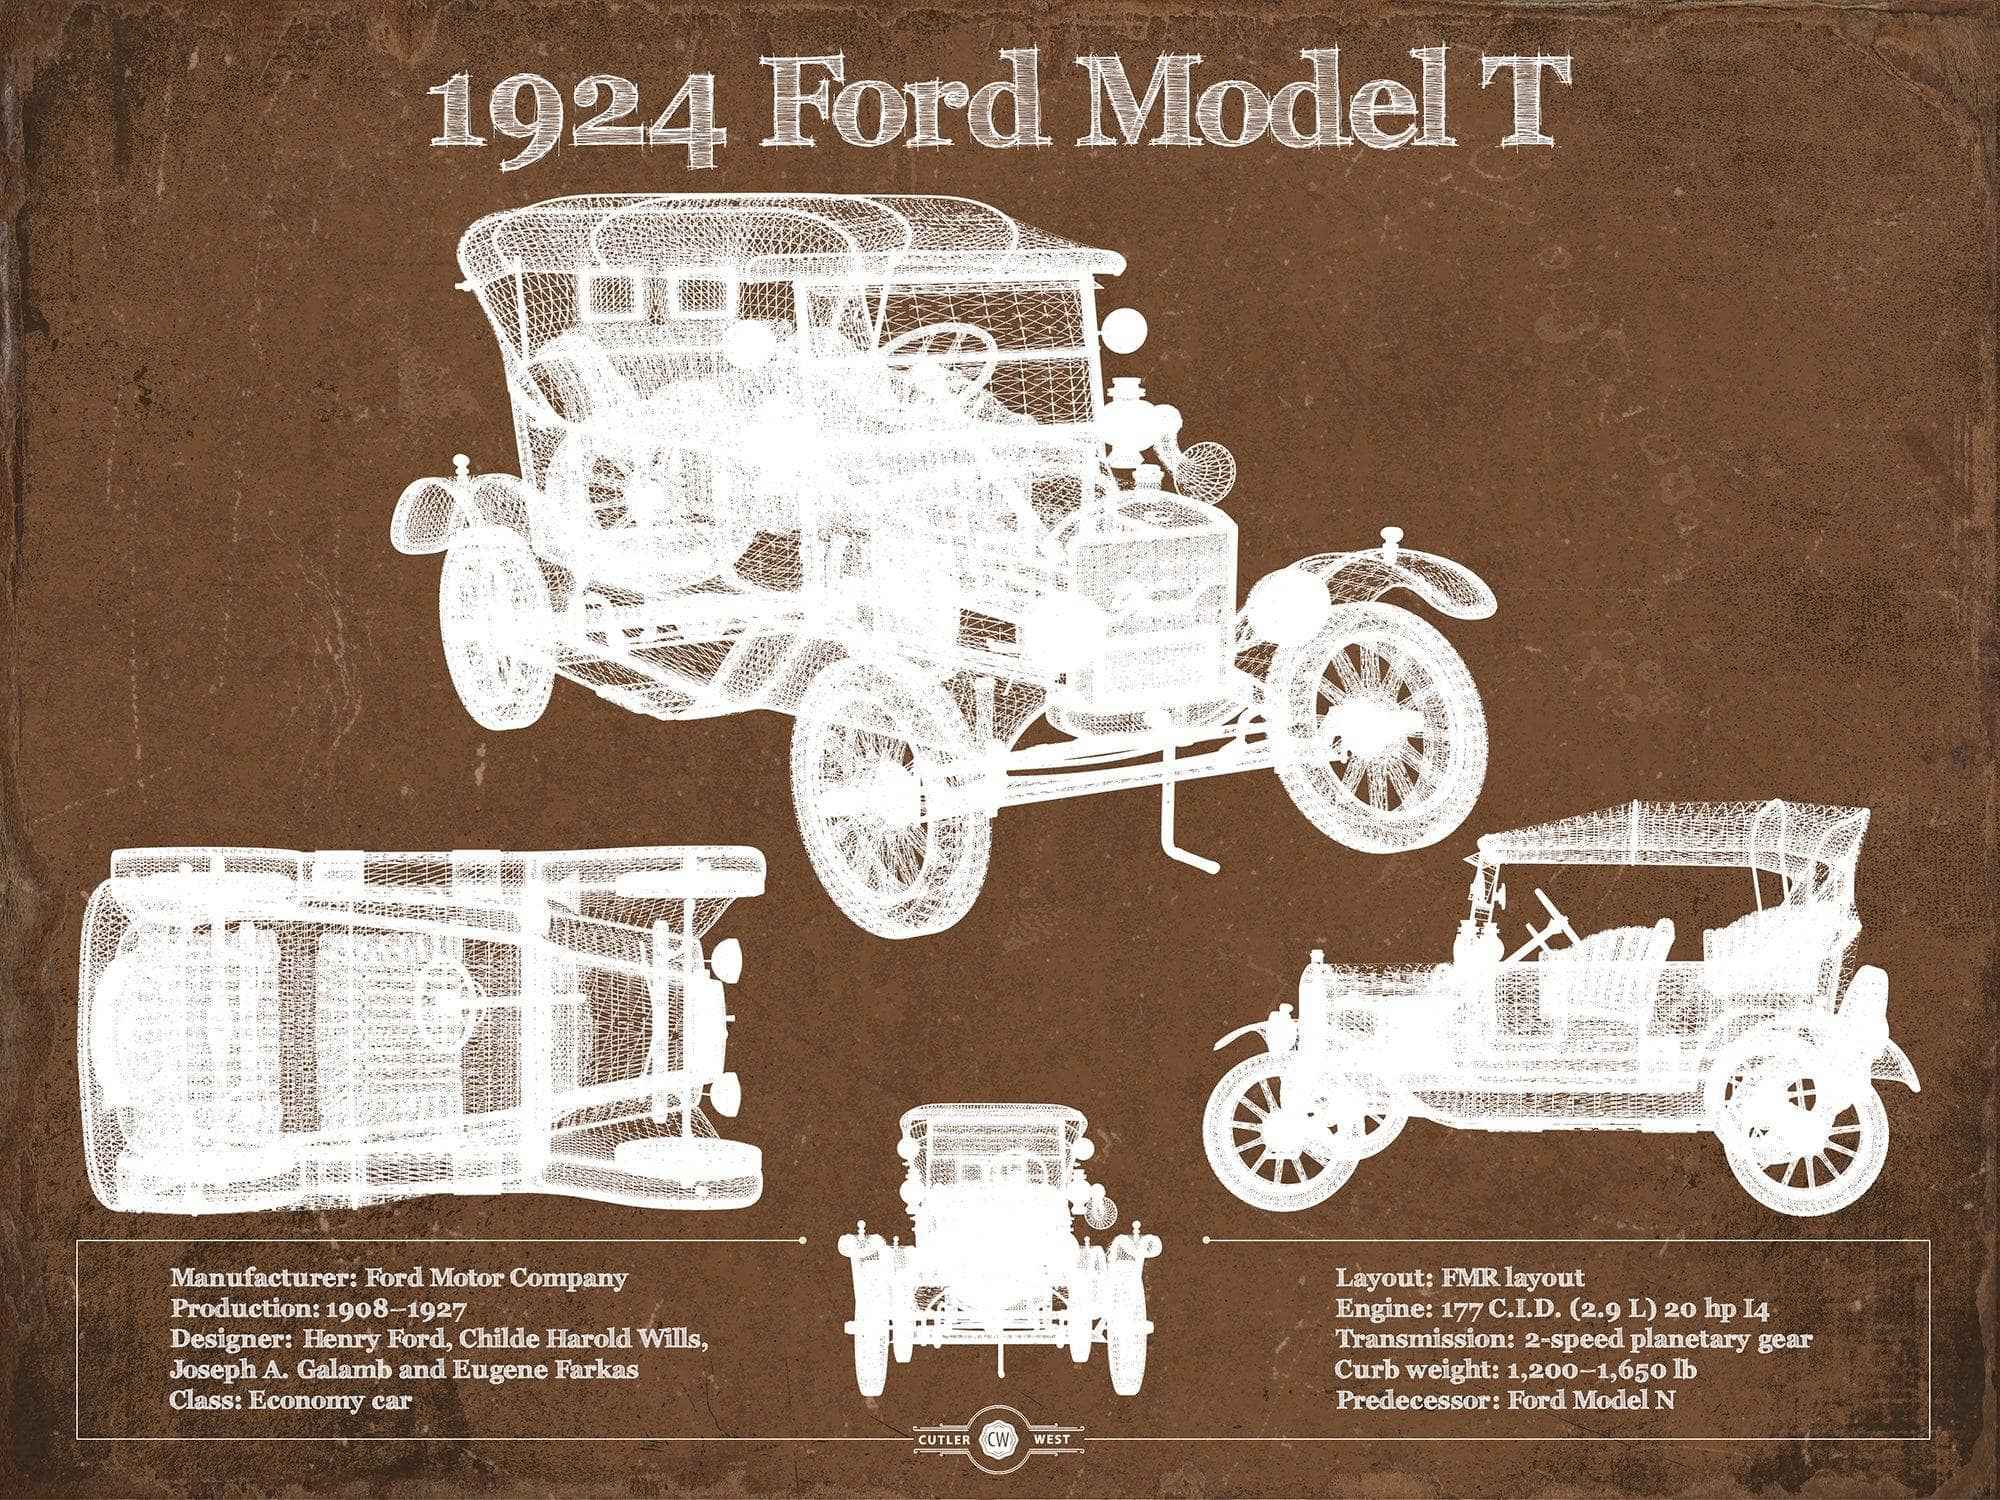 Cutler West Ford Collection 14" x 11" / Unframed 1924 Ford Model T Vintage Blueprint Auto Print 933350040_33756